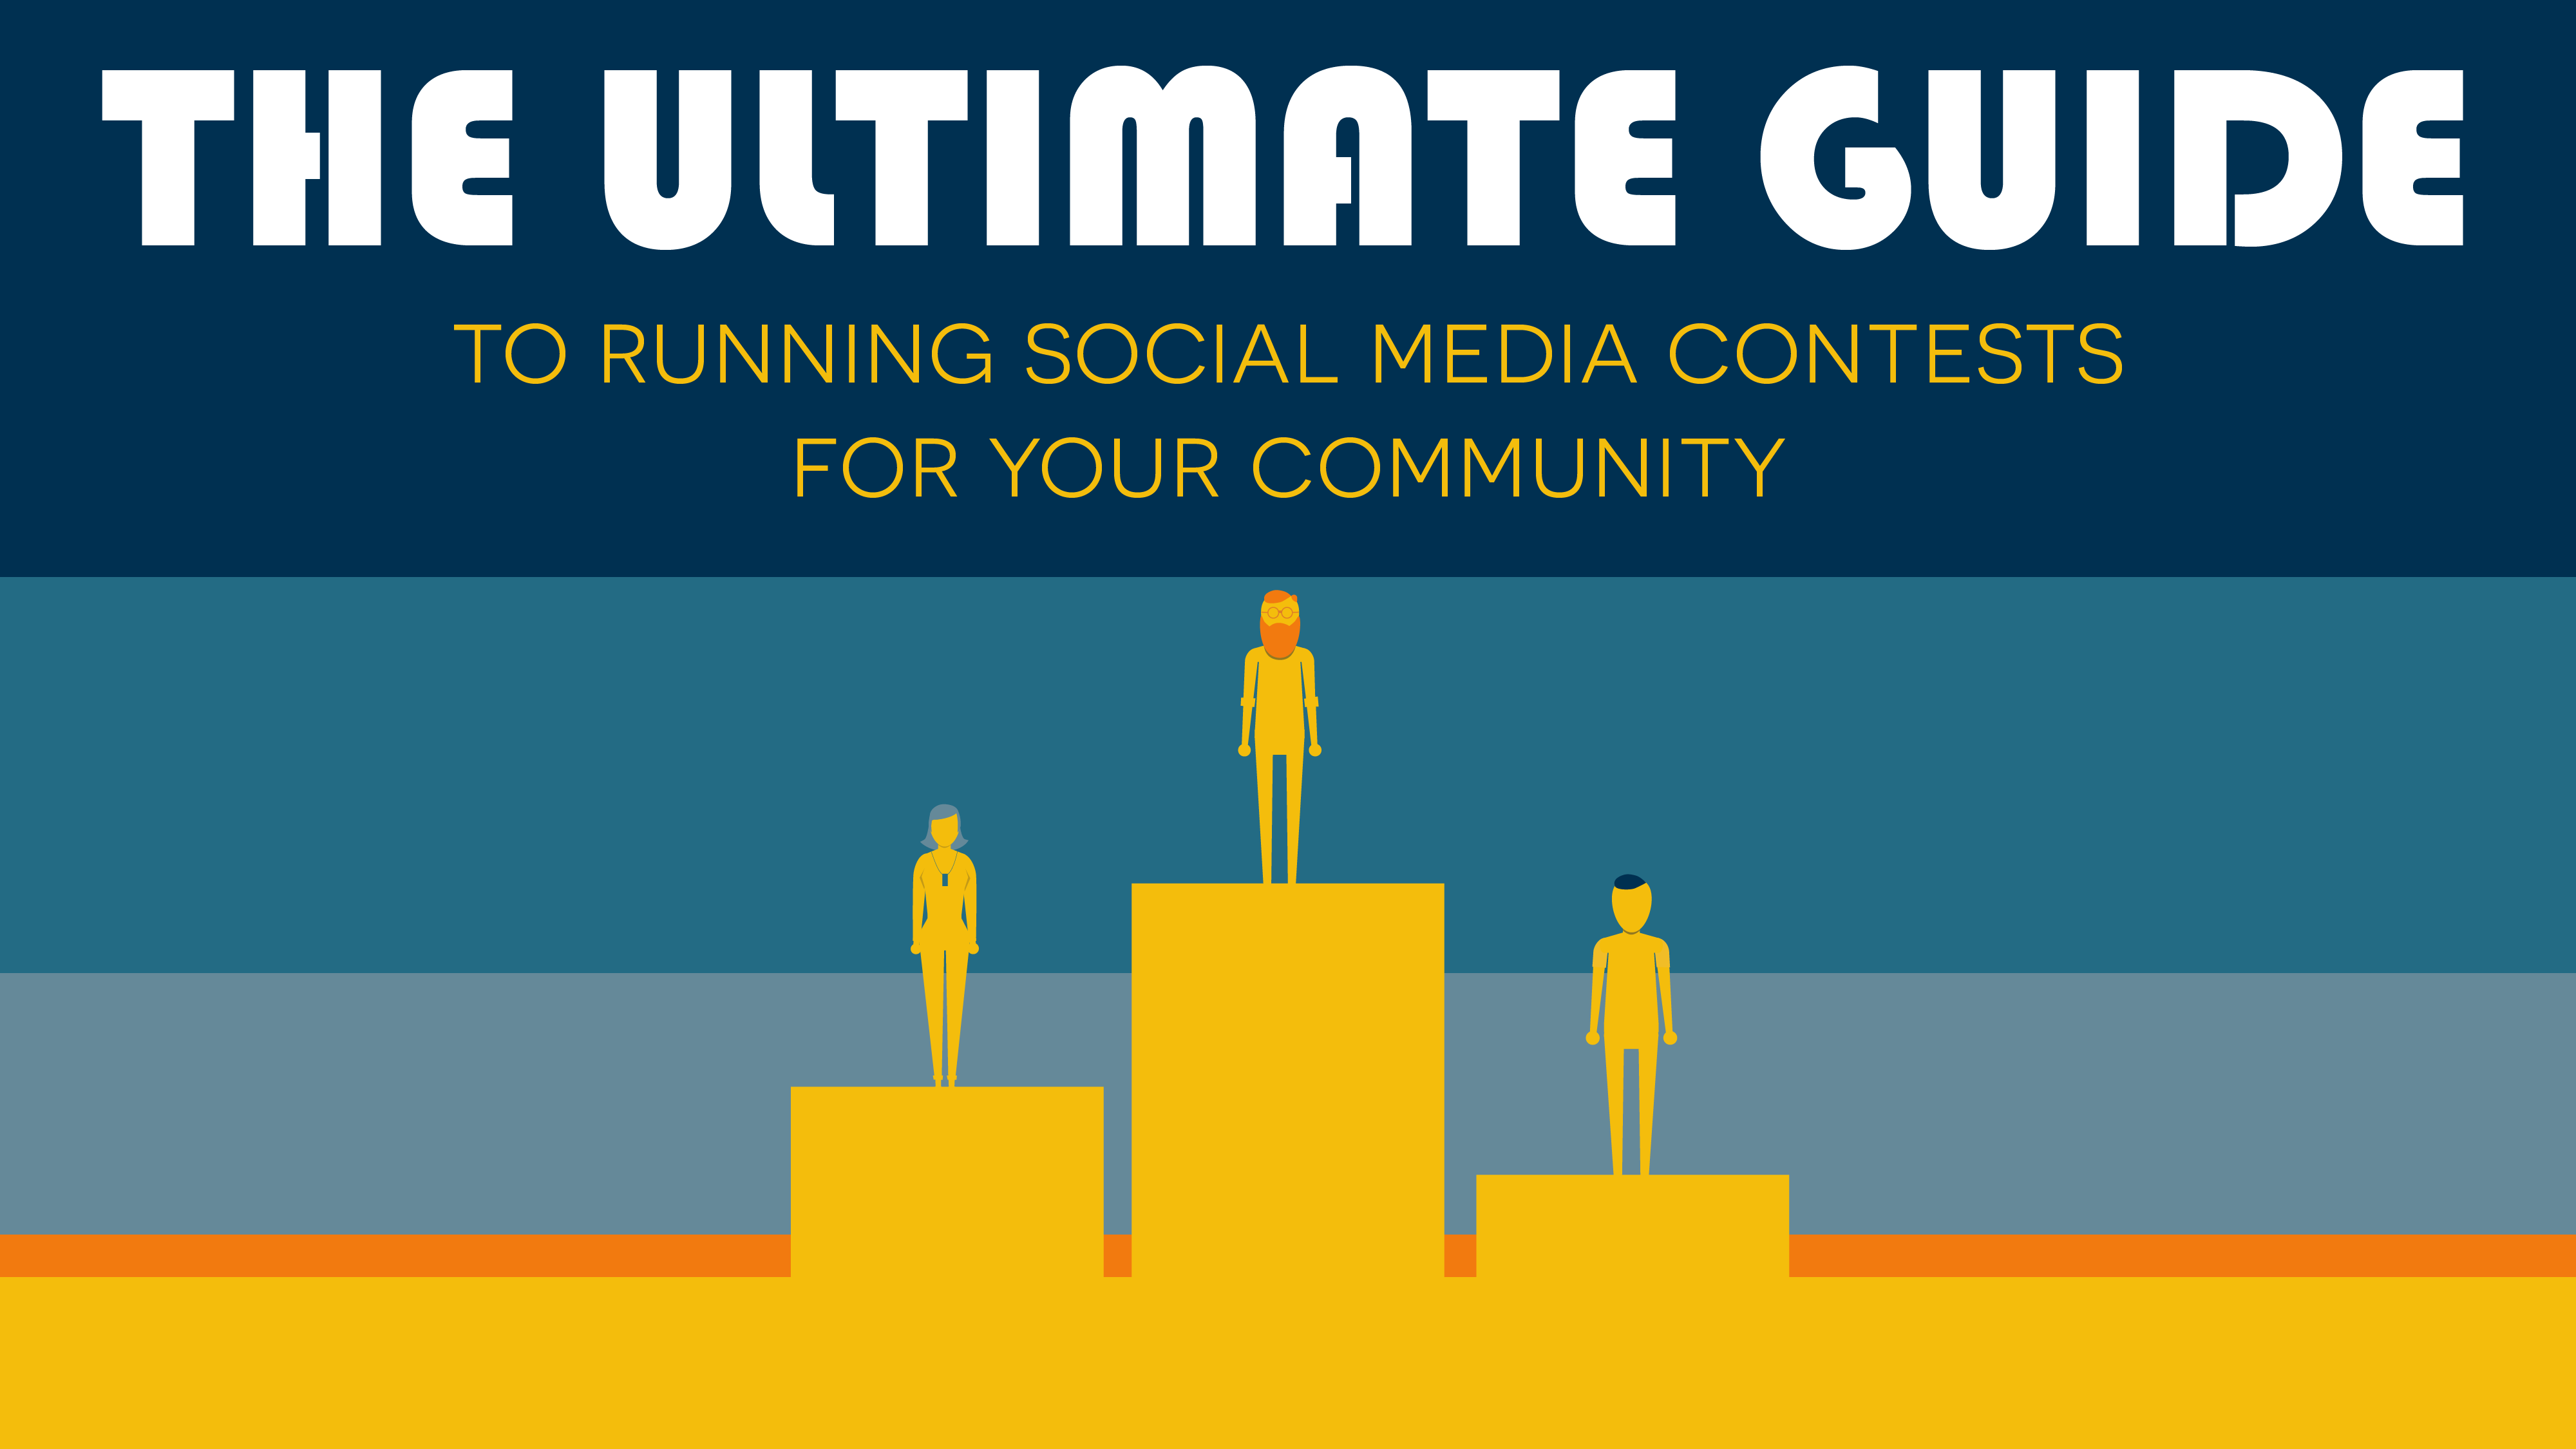 The Ultimate Guide to Running Social Media Contests for Your Community